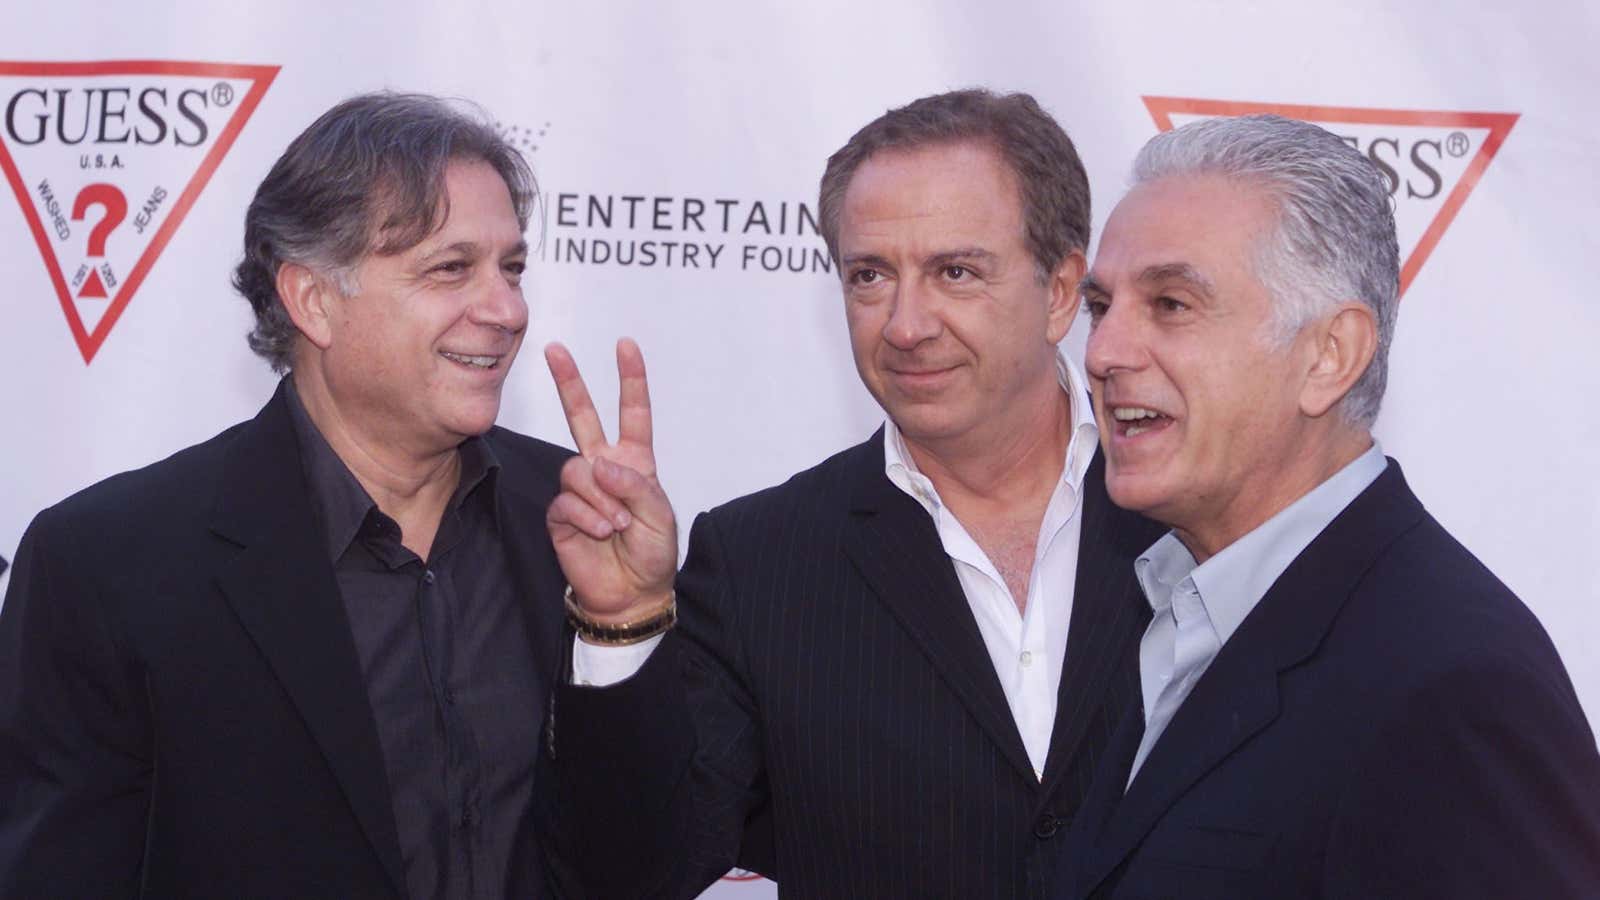 Guess? clothing line founders Armand, Paul, and Maurice Marciano in 2002.